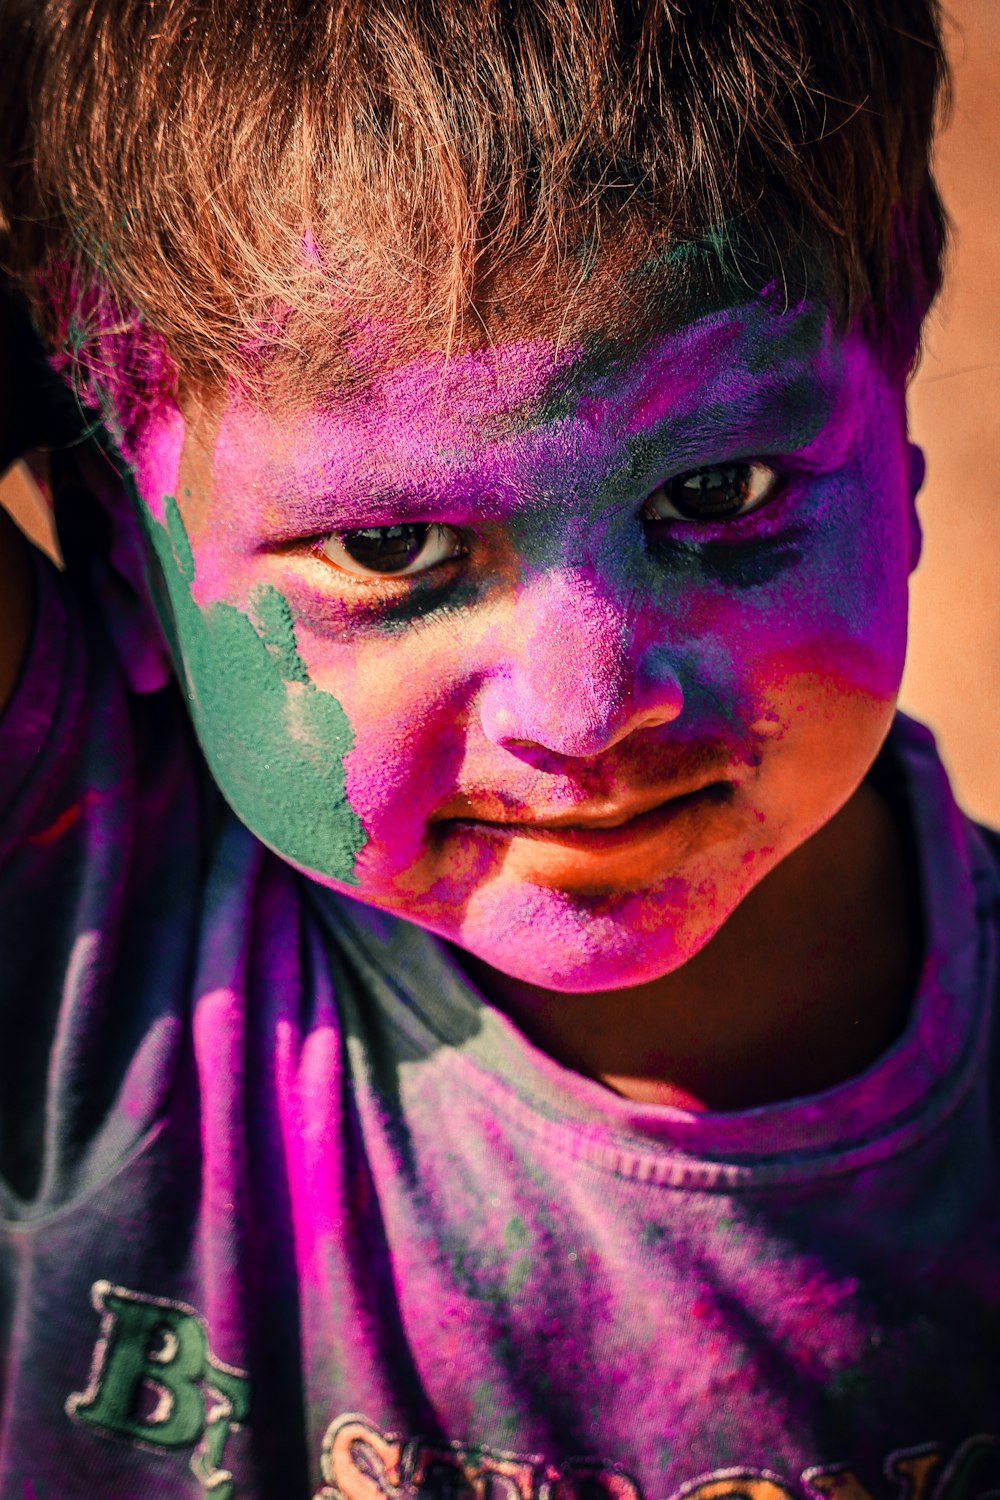 a young boy is covered in purple and green paint